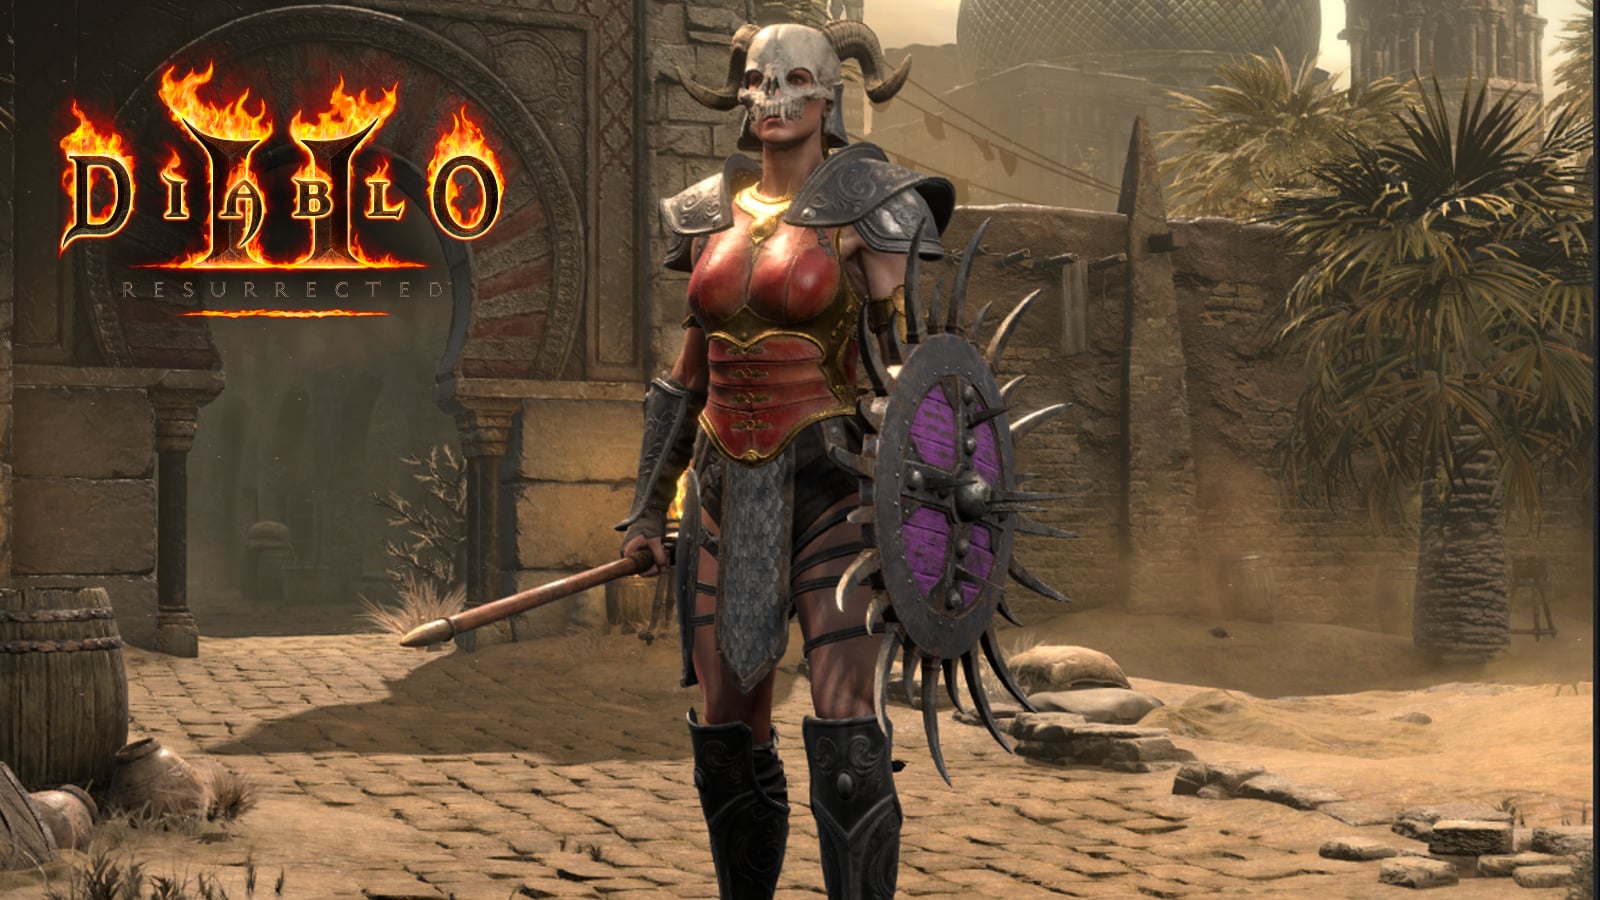 Diablo largely begins once the main story is complete, Online Event